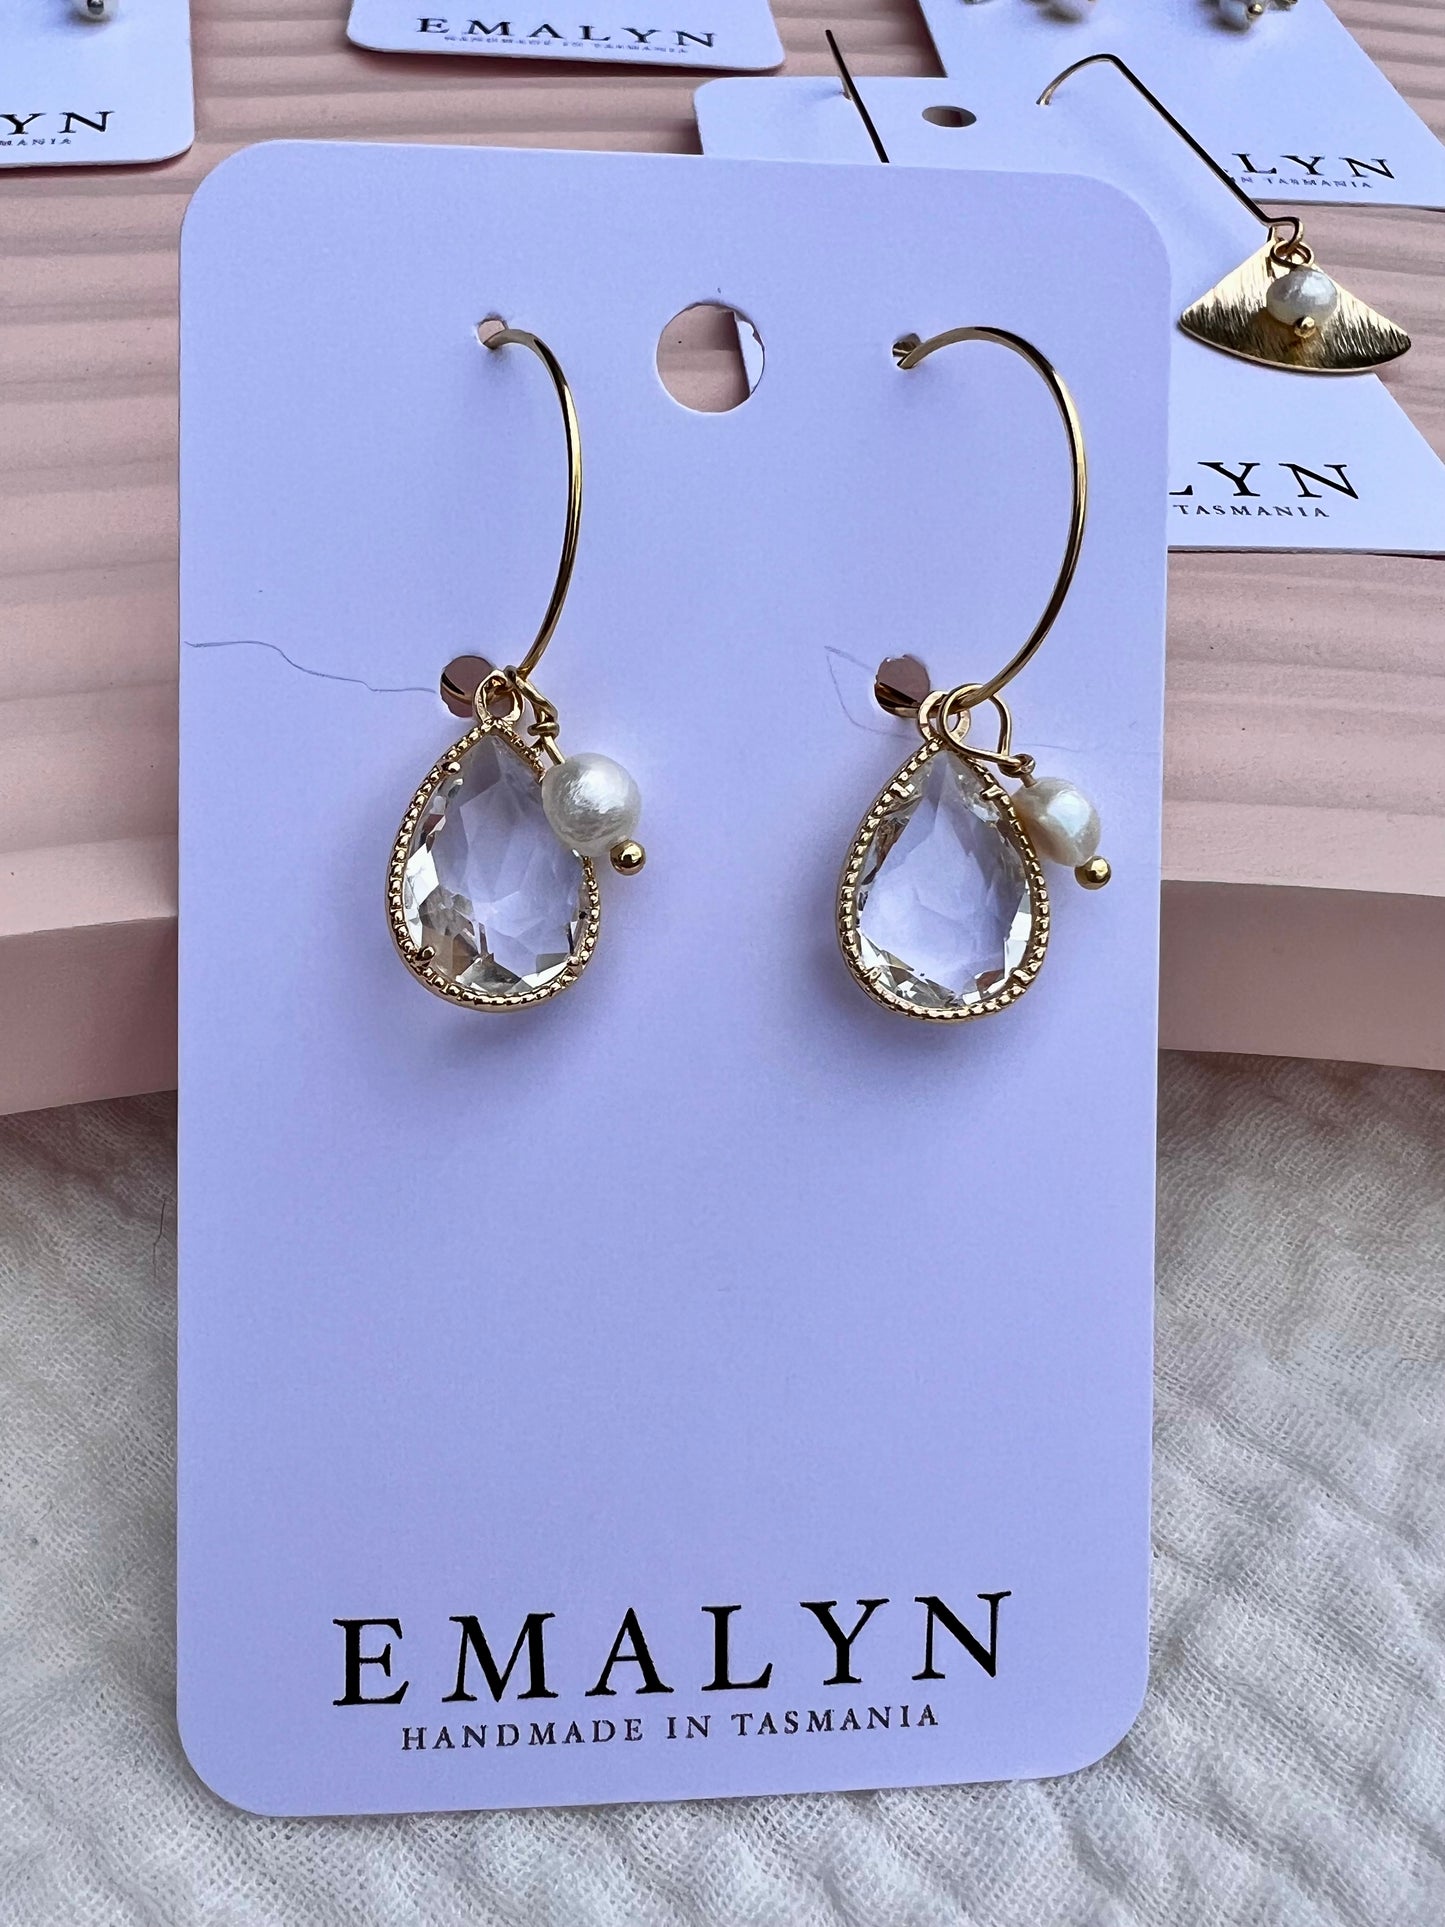 Pearl and Gold Earrings